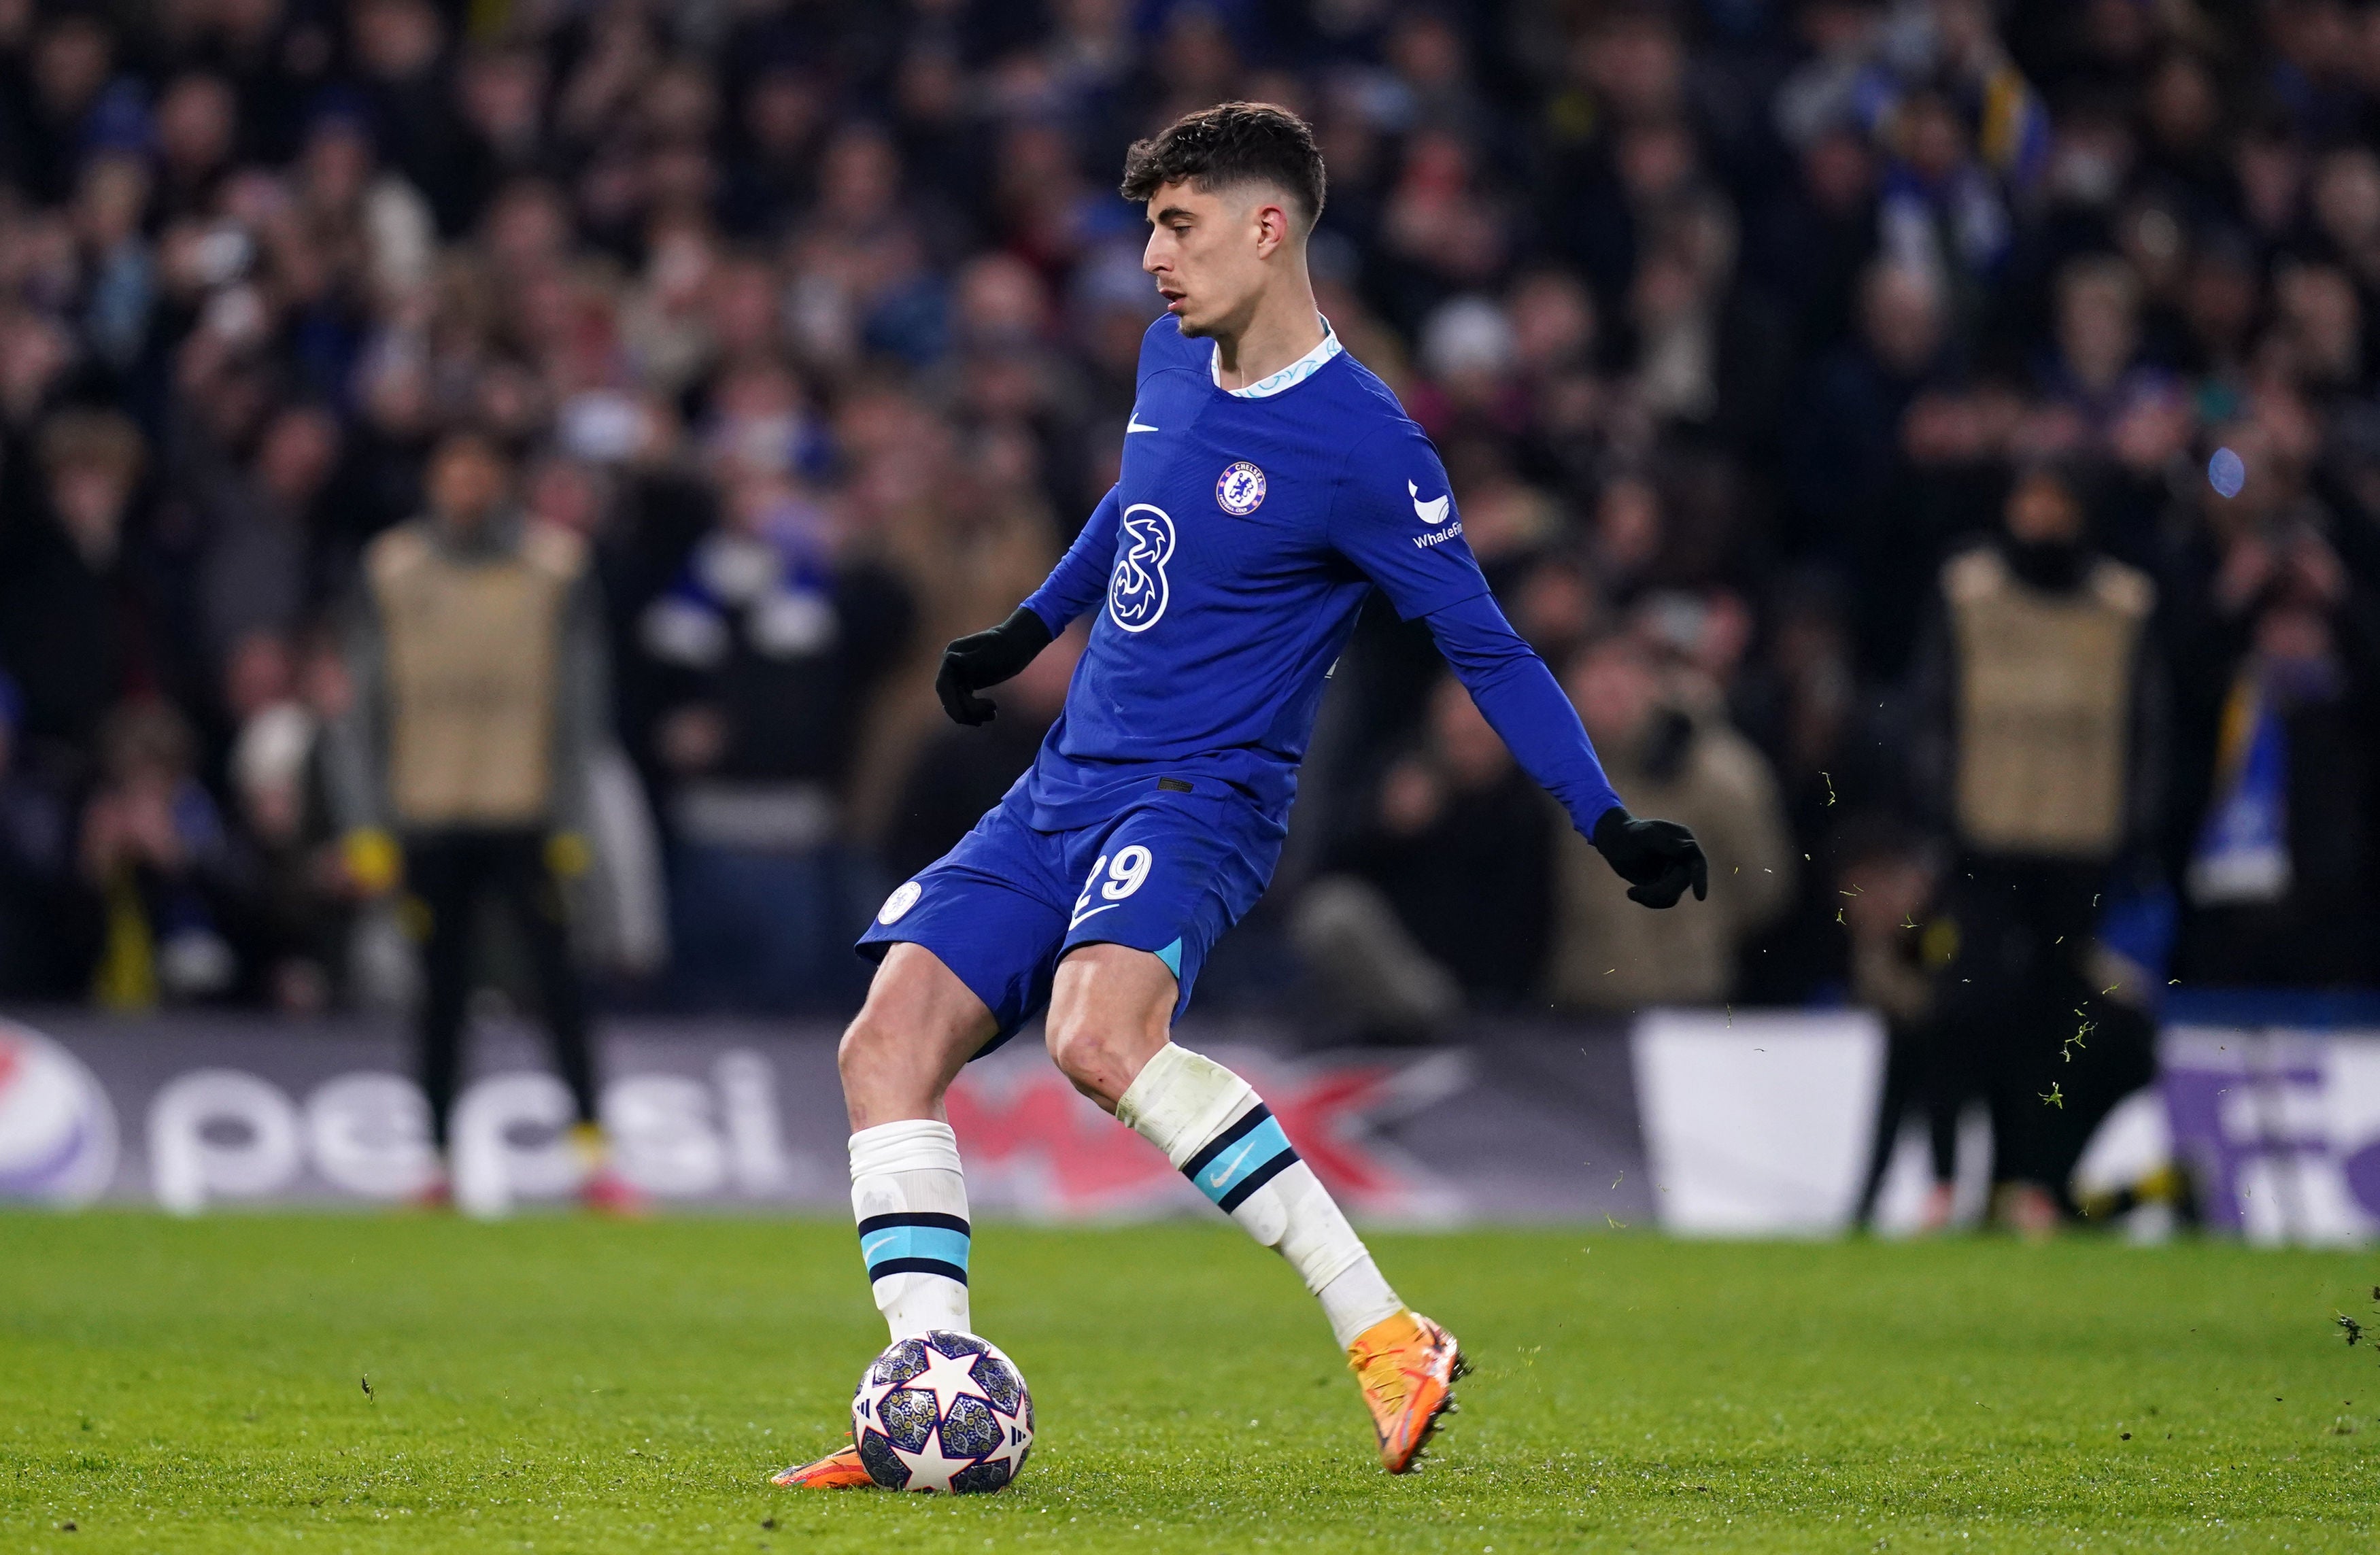 Kai Havertz converted at the second attempt from the penalty spot to take Chelsea through in the Champions League